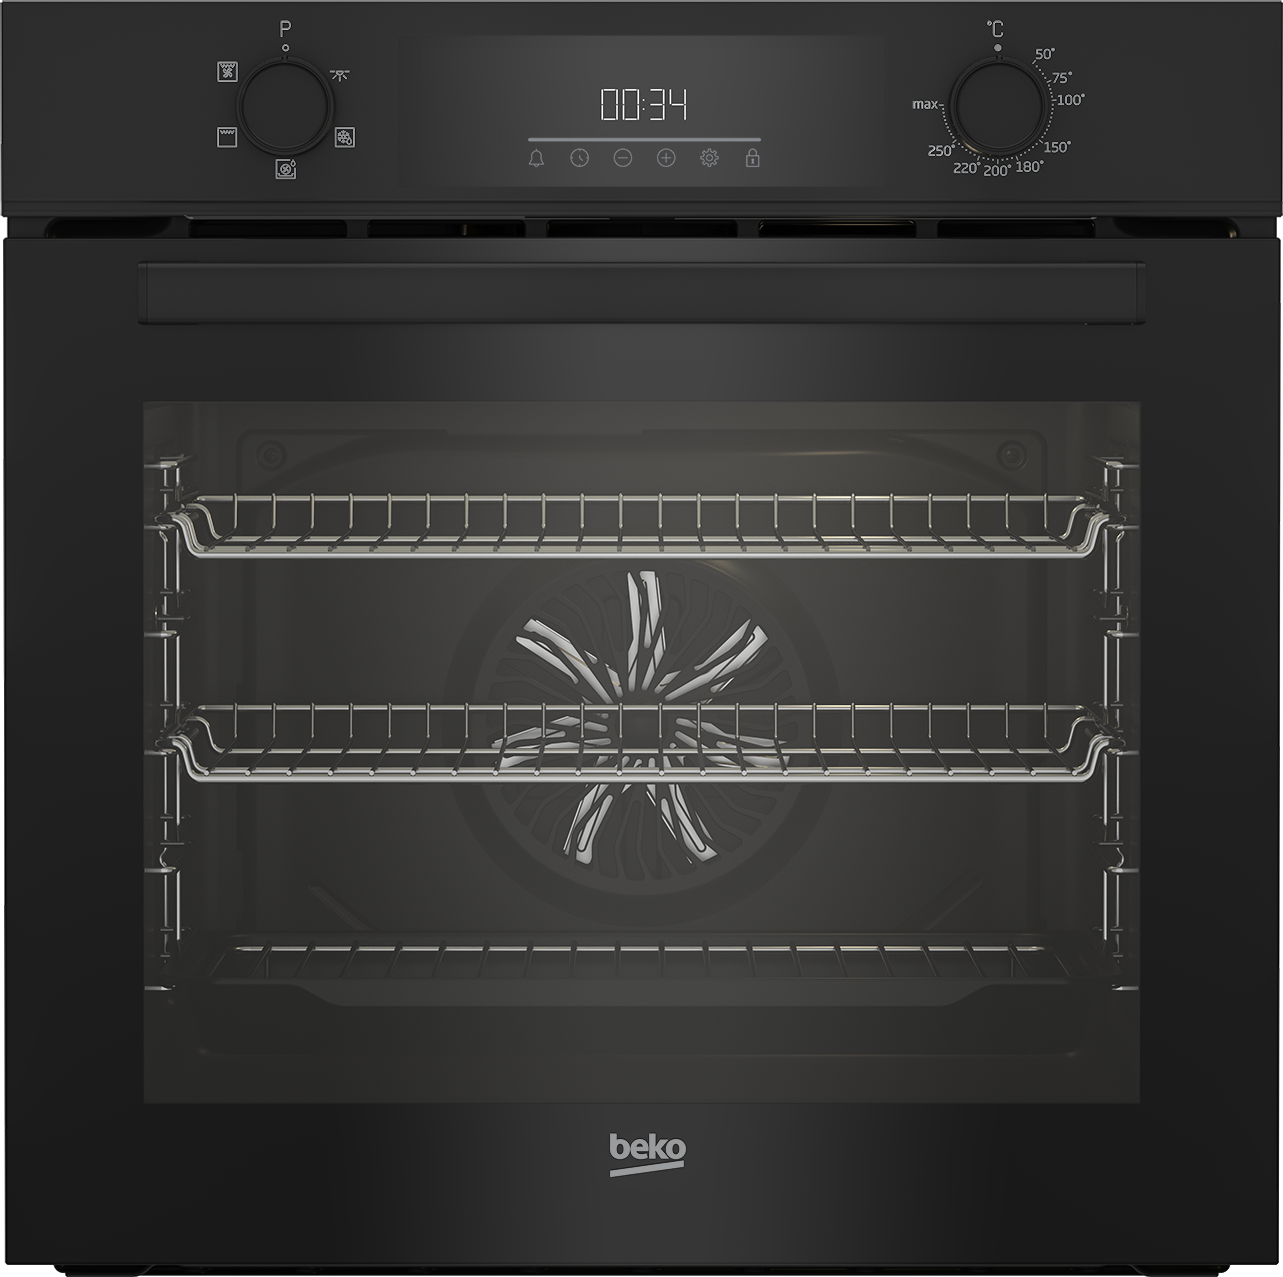 Beko AeroPerfect RecycledNet BBIF22300B Built In Electric Single Oven - Black - A Rated, Black